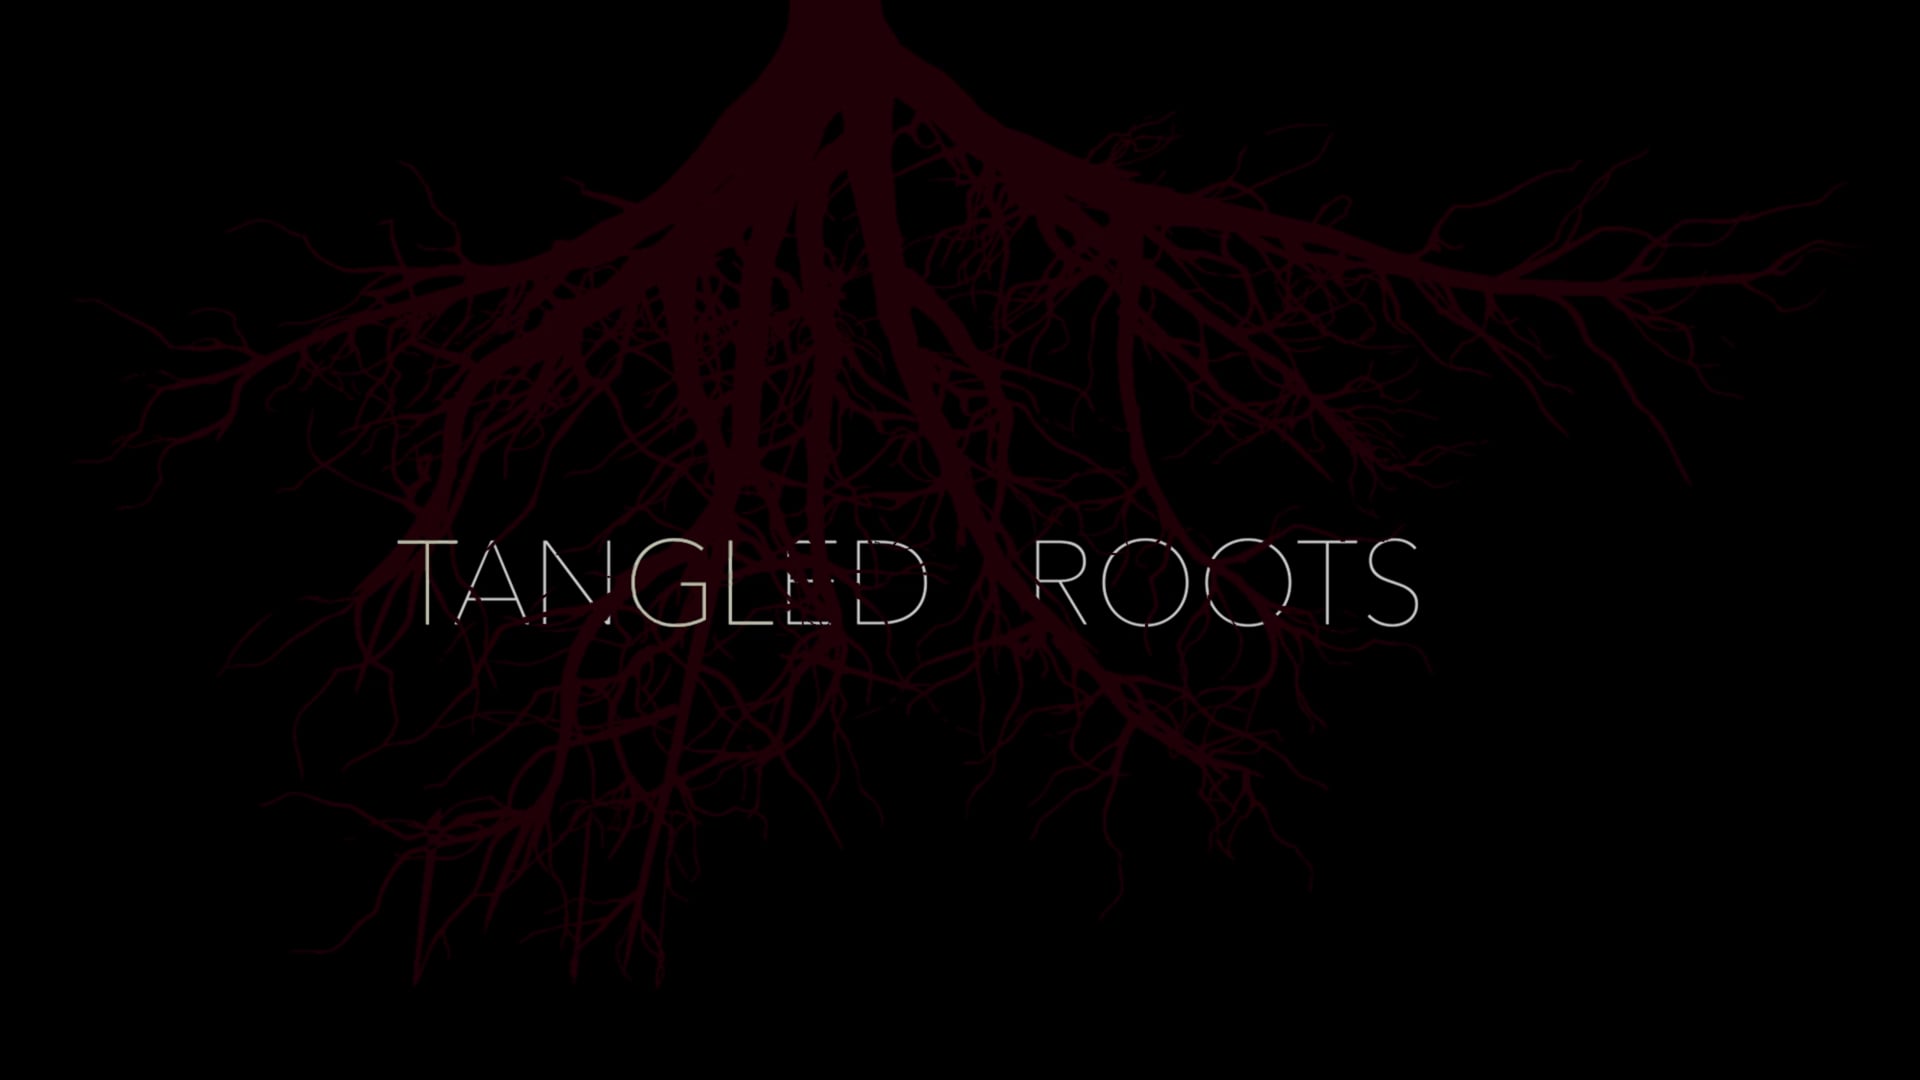 TANGLED ROOTS - Trailer